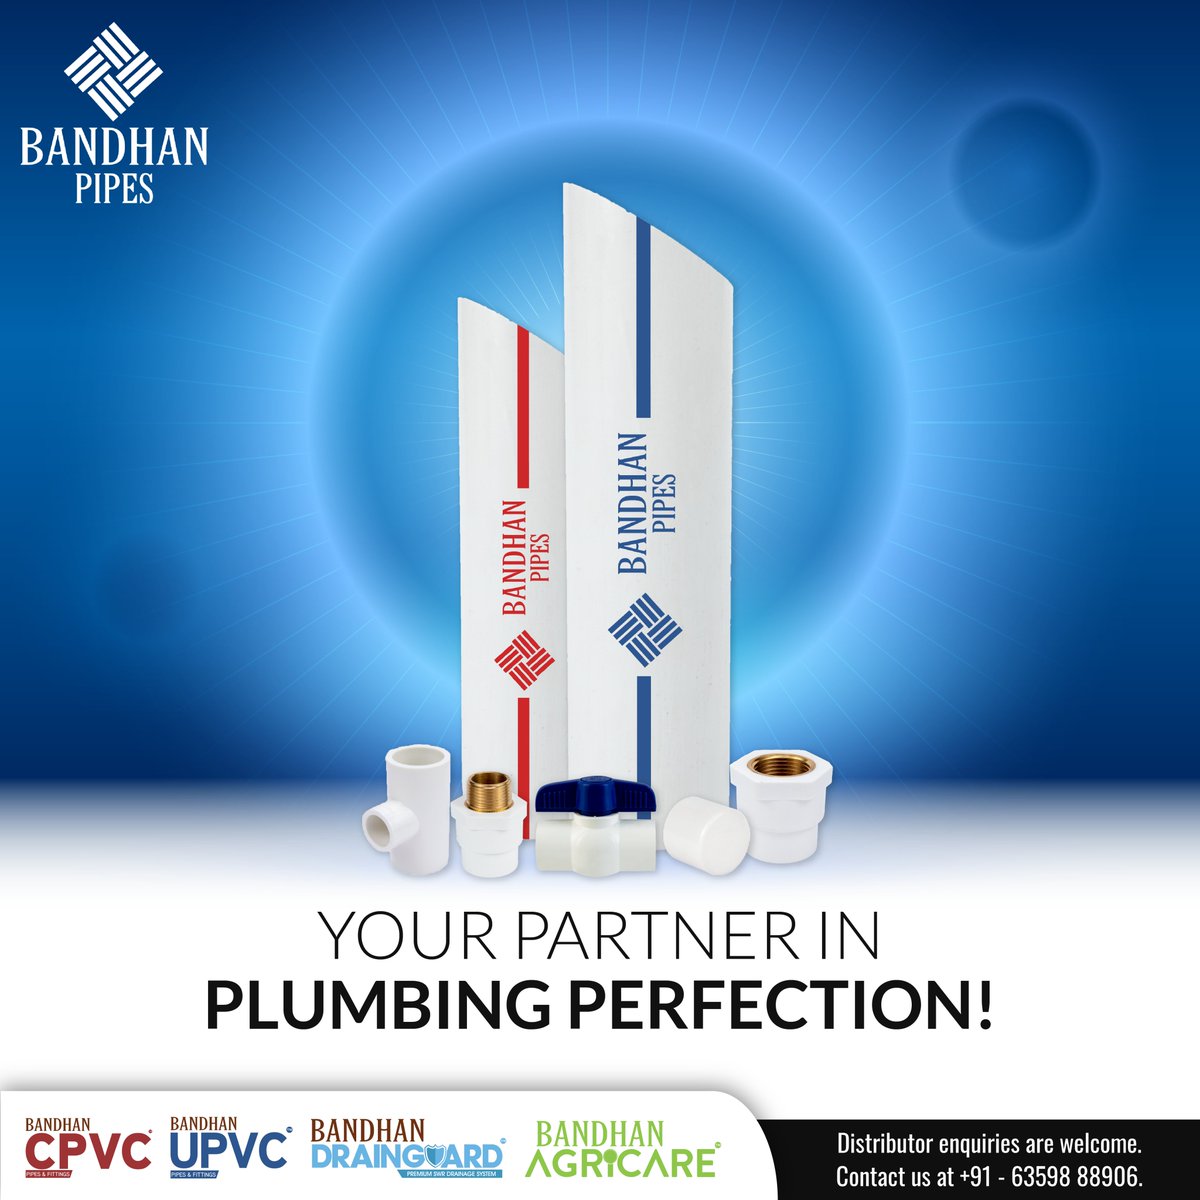 Experience flawless flow with Bandhan Pipes – your ultimate plumbing partner! From reliability to efficiency, we've got you covered. . . #bandhanpipes #drainguard #SochoBandhanPipes #pipes #plumbing #pvc #pvcpipes #industry #cpvc #upvc #swr #waterpipes #water #watersupply